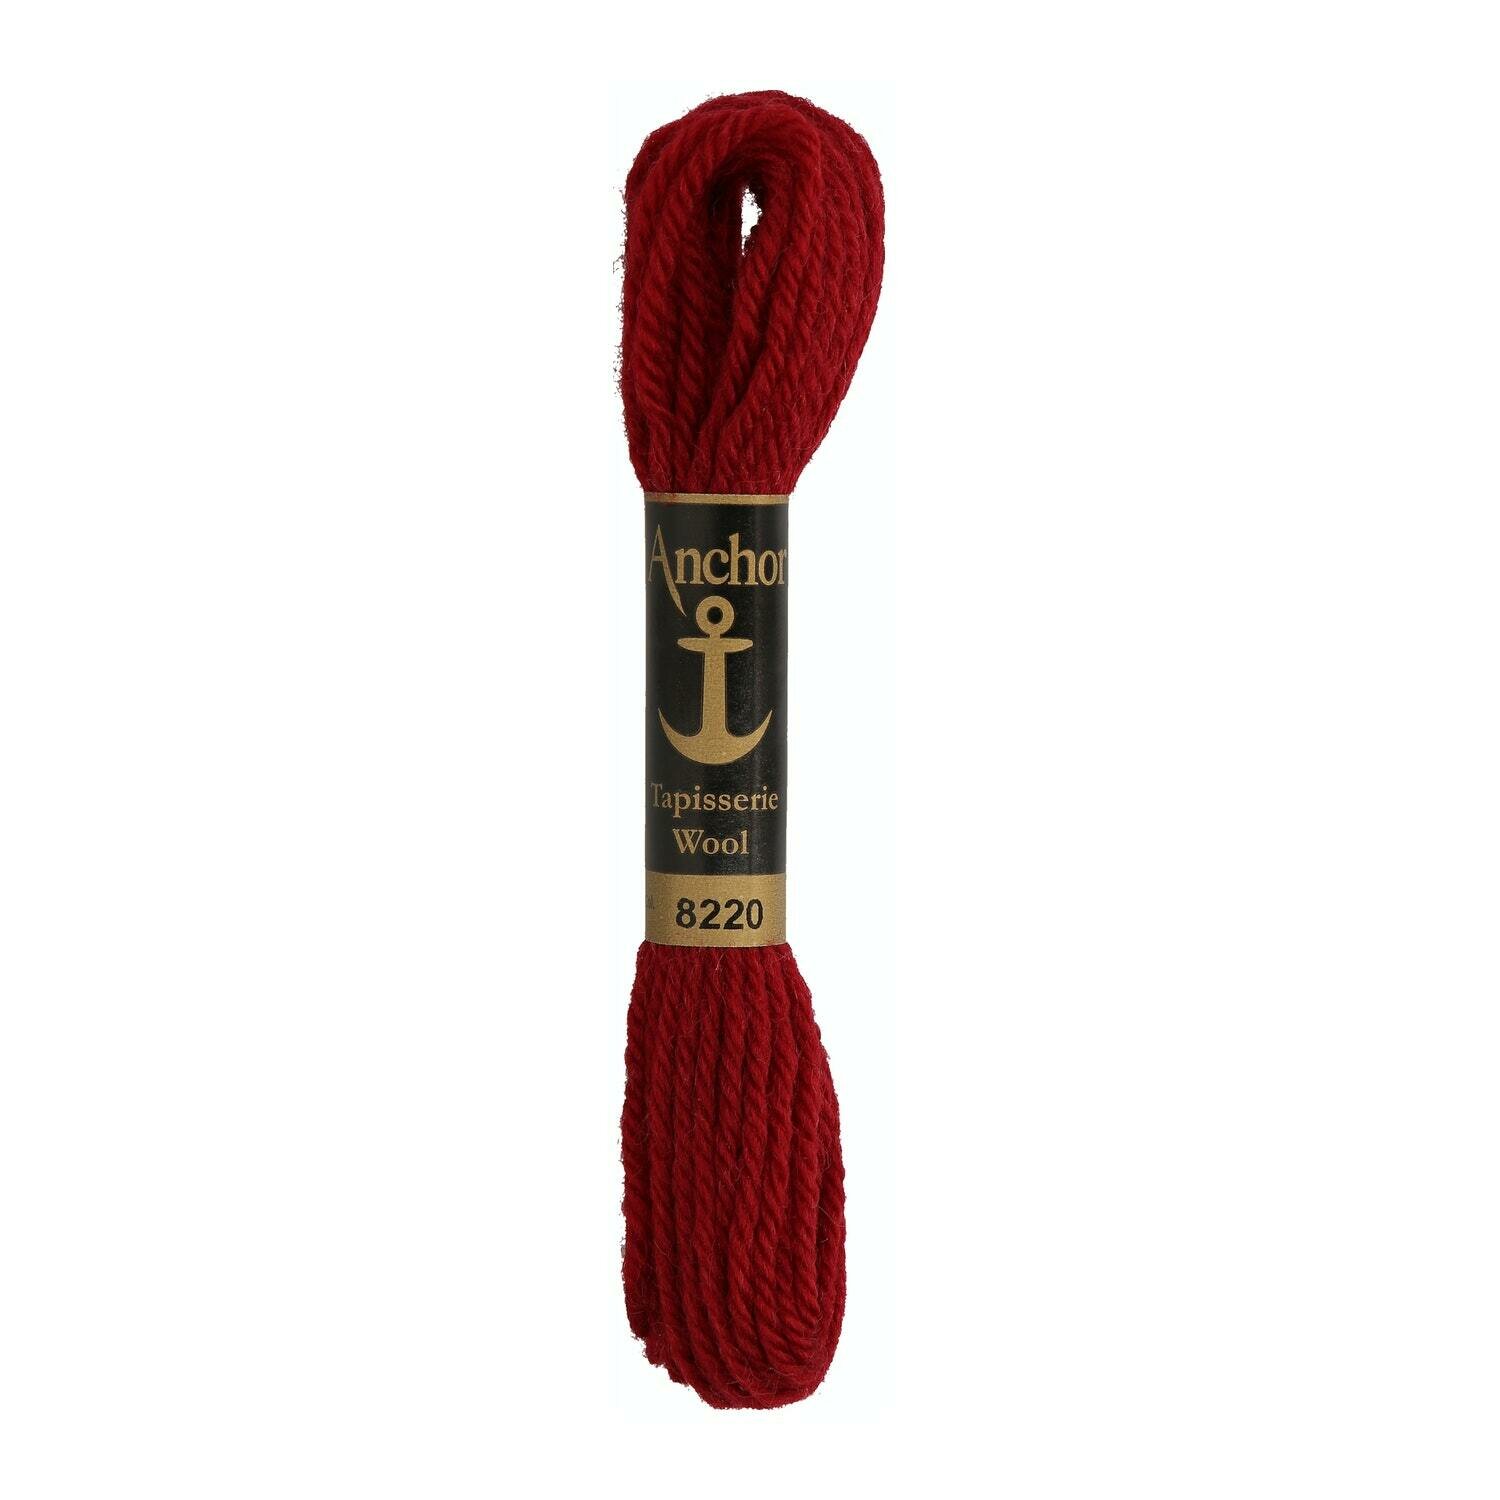 Anchor Tapisserie Wool # 08220